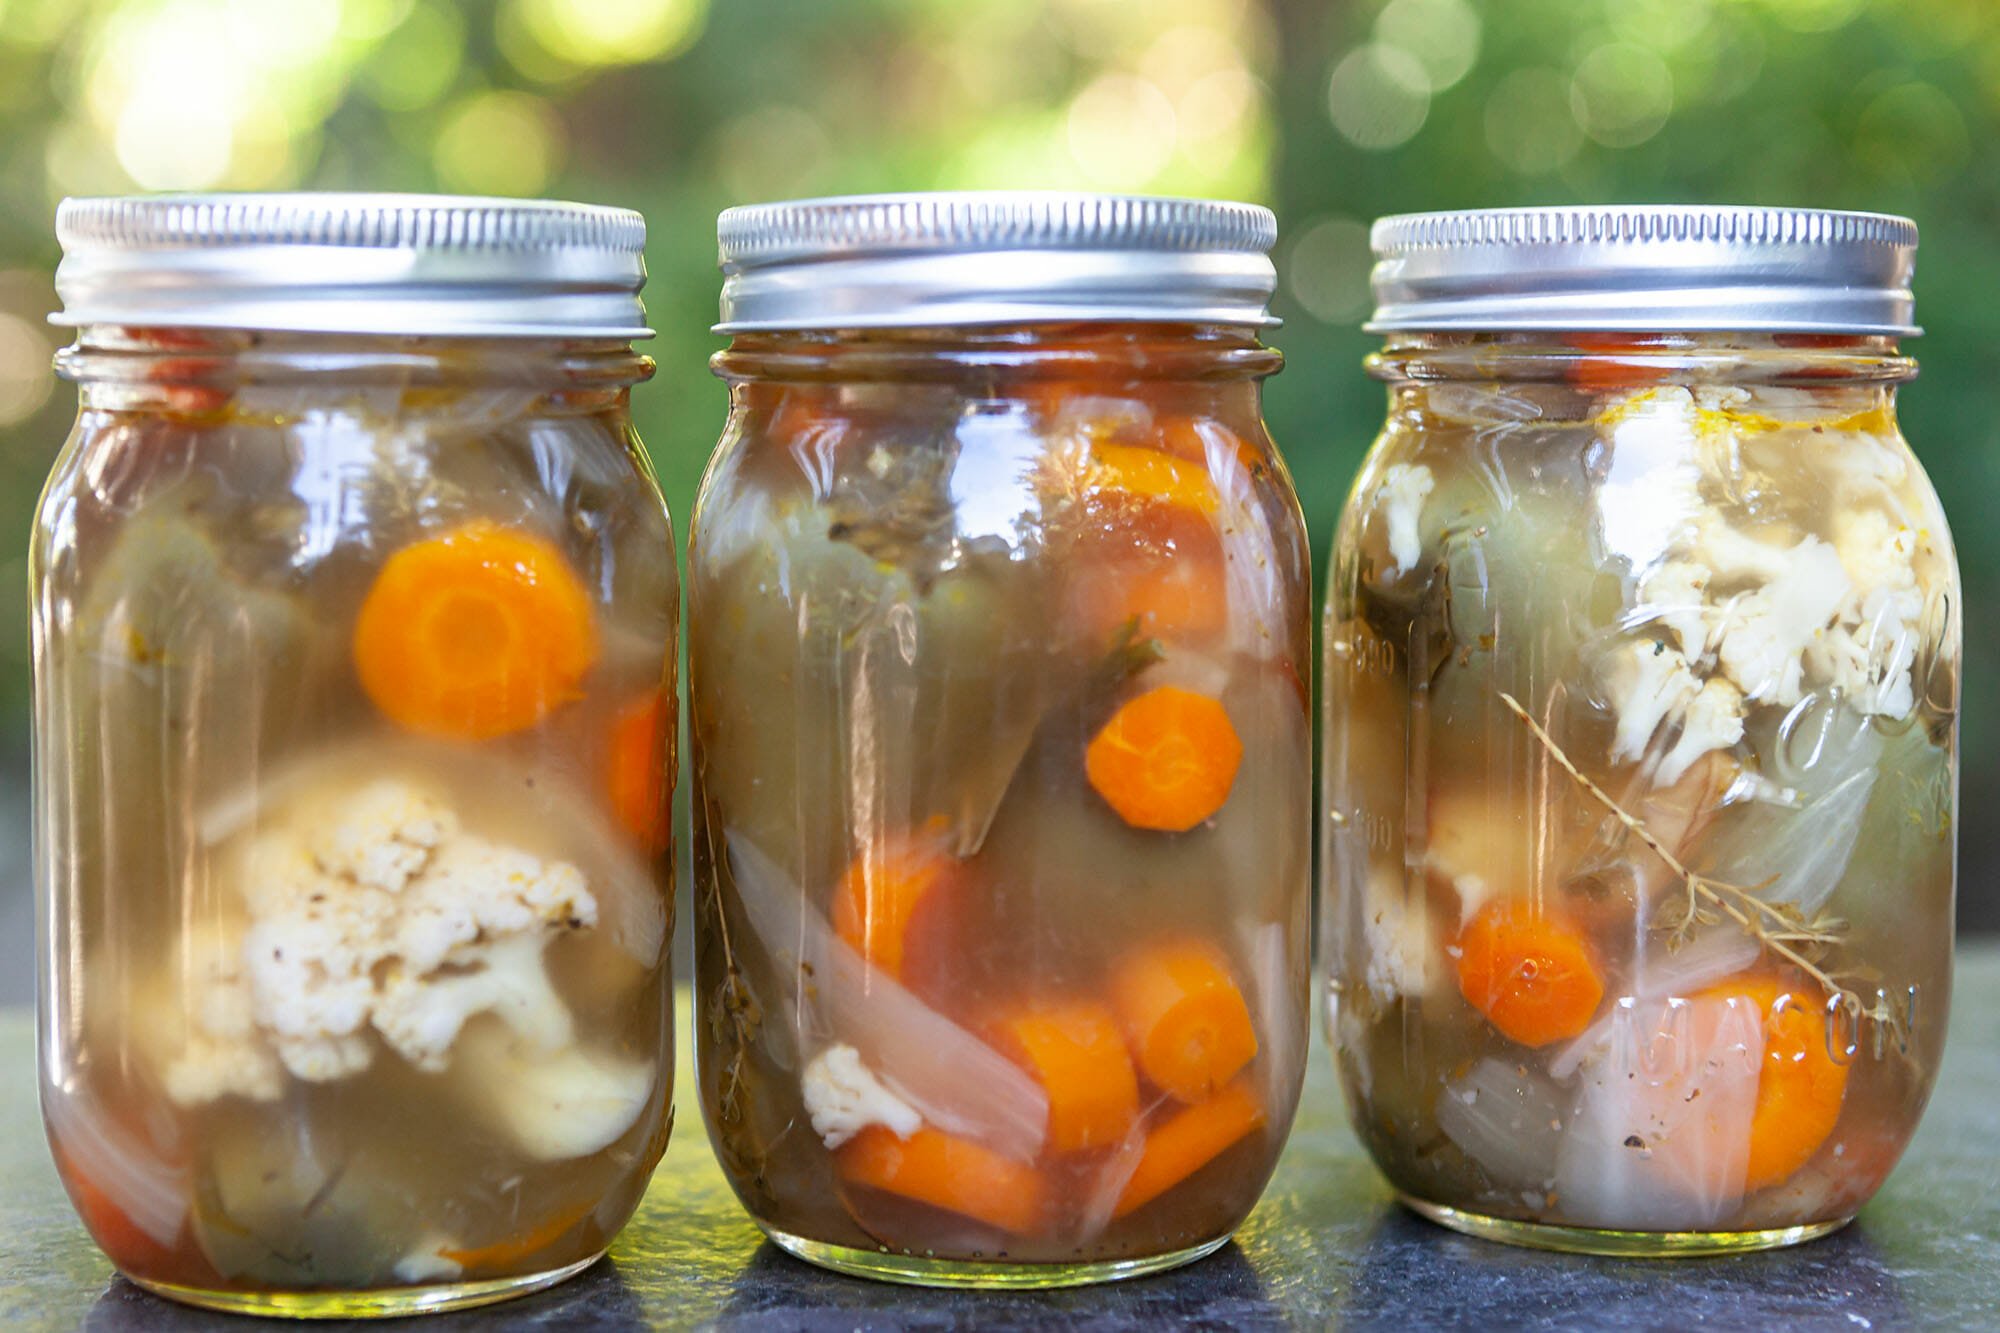 Escabeche (Pickled Jalapenos) in pint jars, canned with carrots and cauliflower